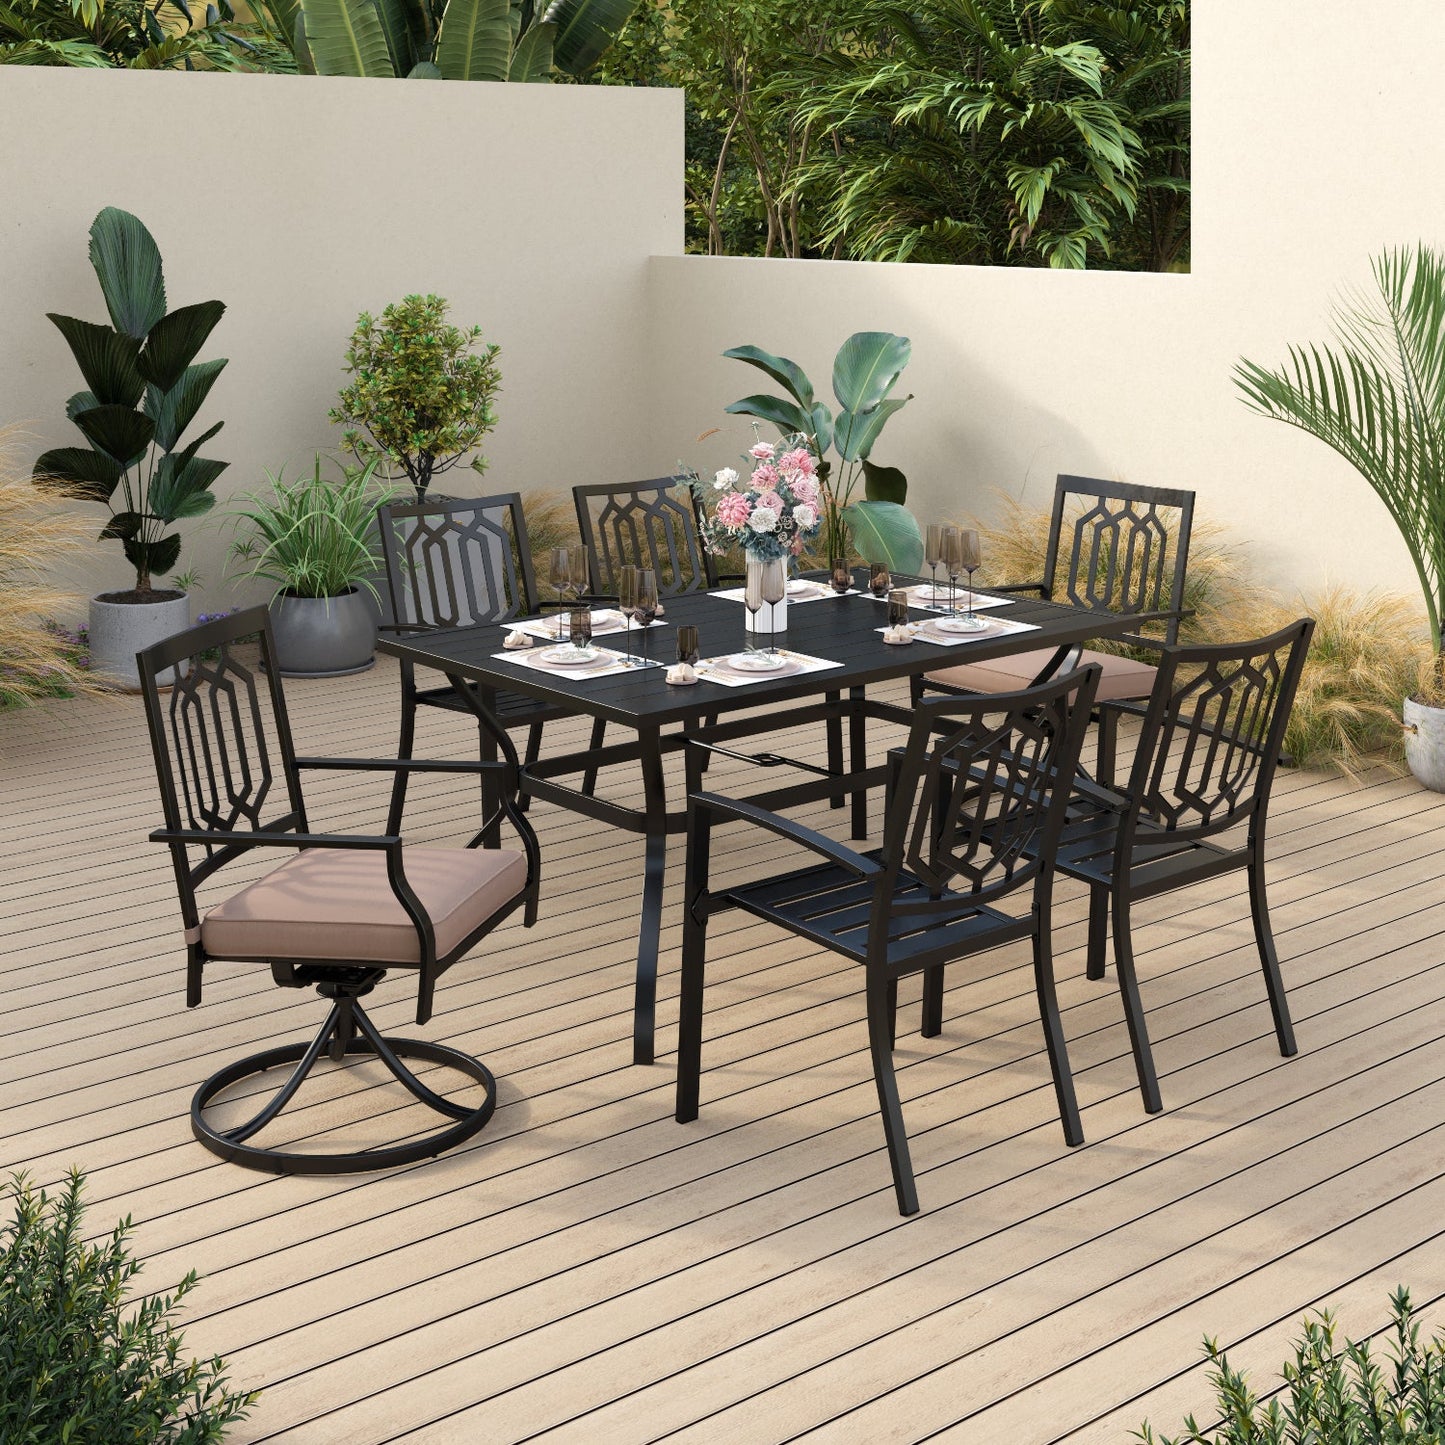 Sophia & William 7 Pieces Outdoor Patio Dining Bistro Set 5 Metal Stackable Chairs&1 Swivel Dining Chair and Metal Dining Table